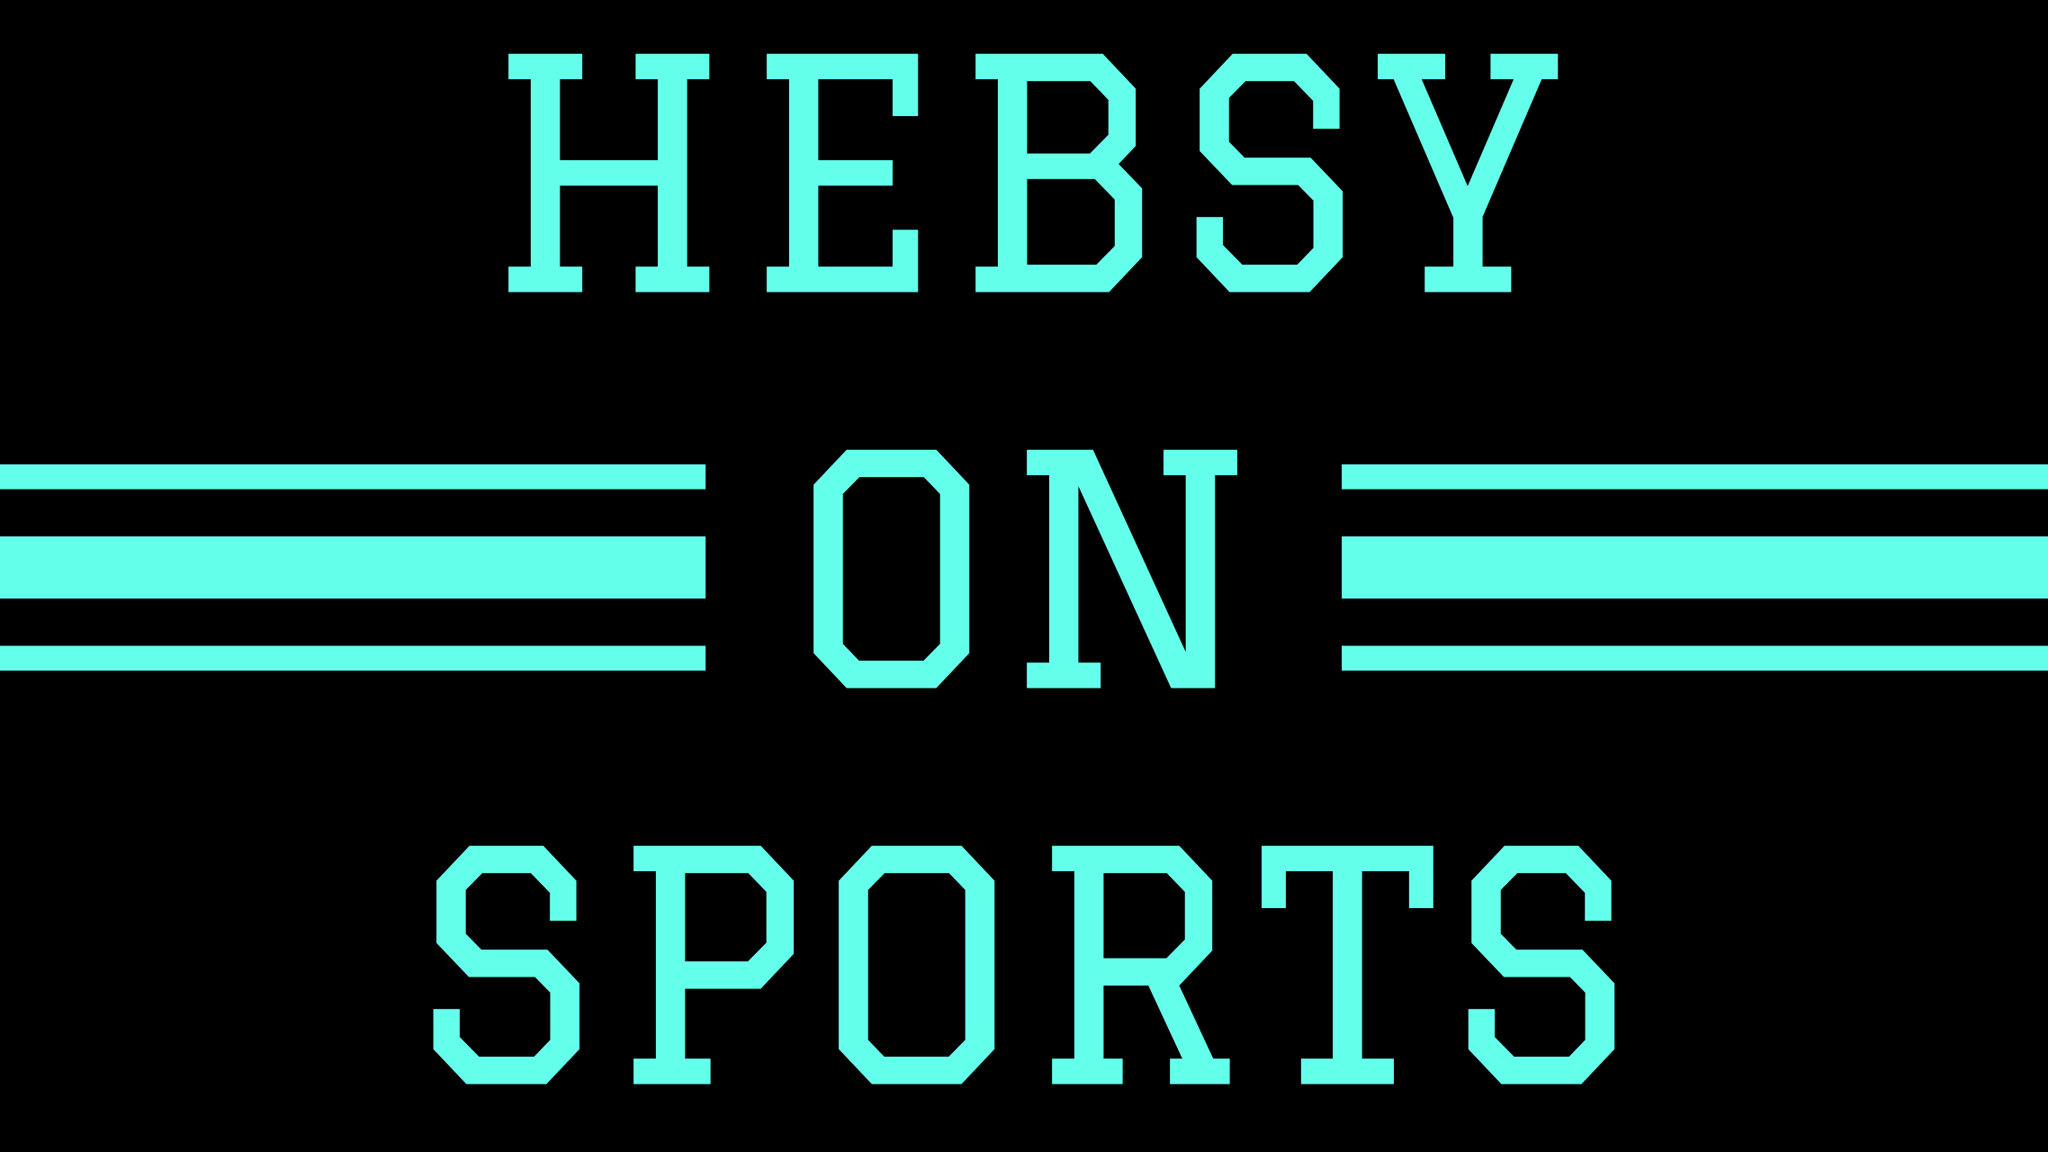 Hebsy on Sports for November 12, 2021